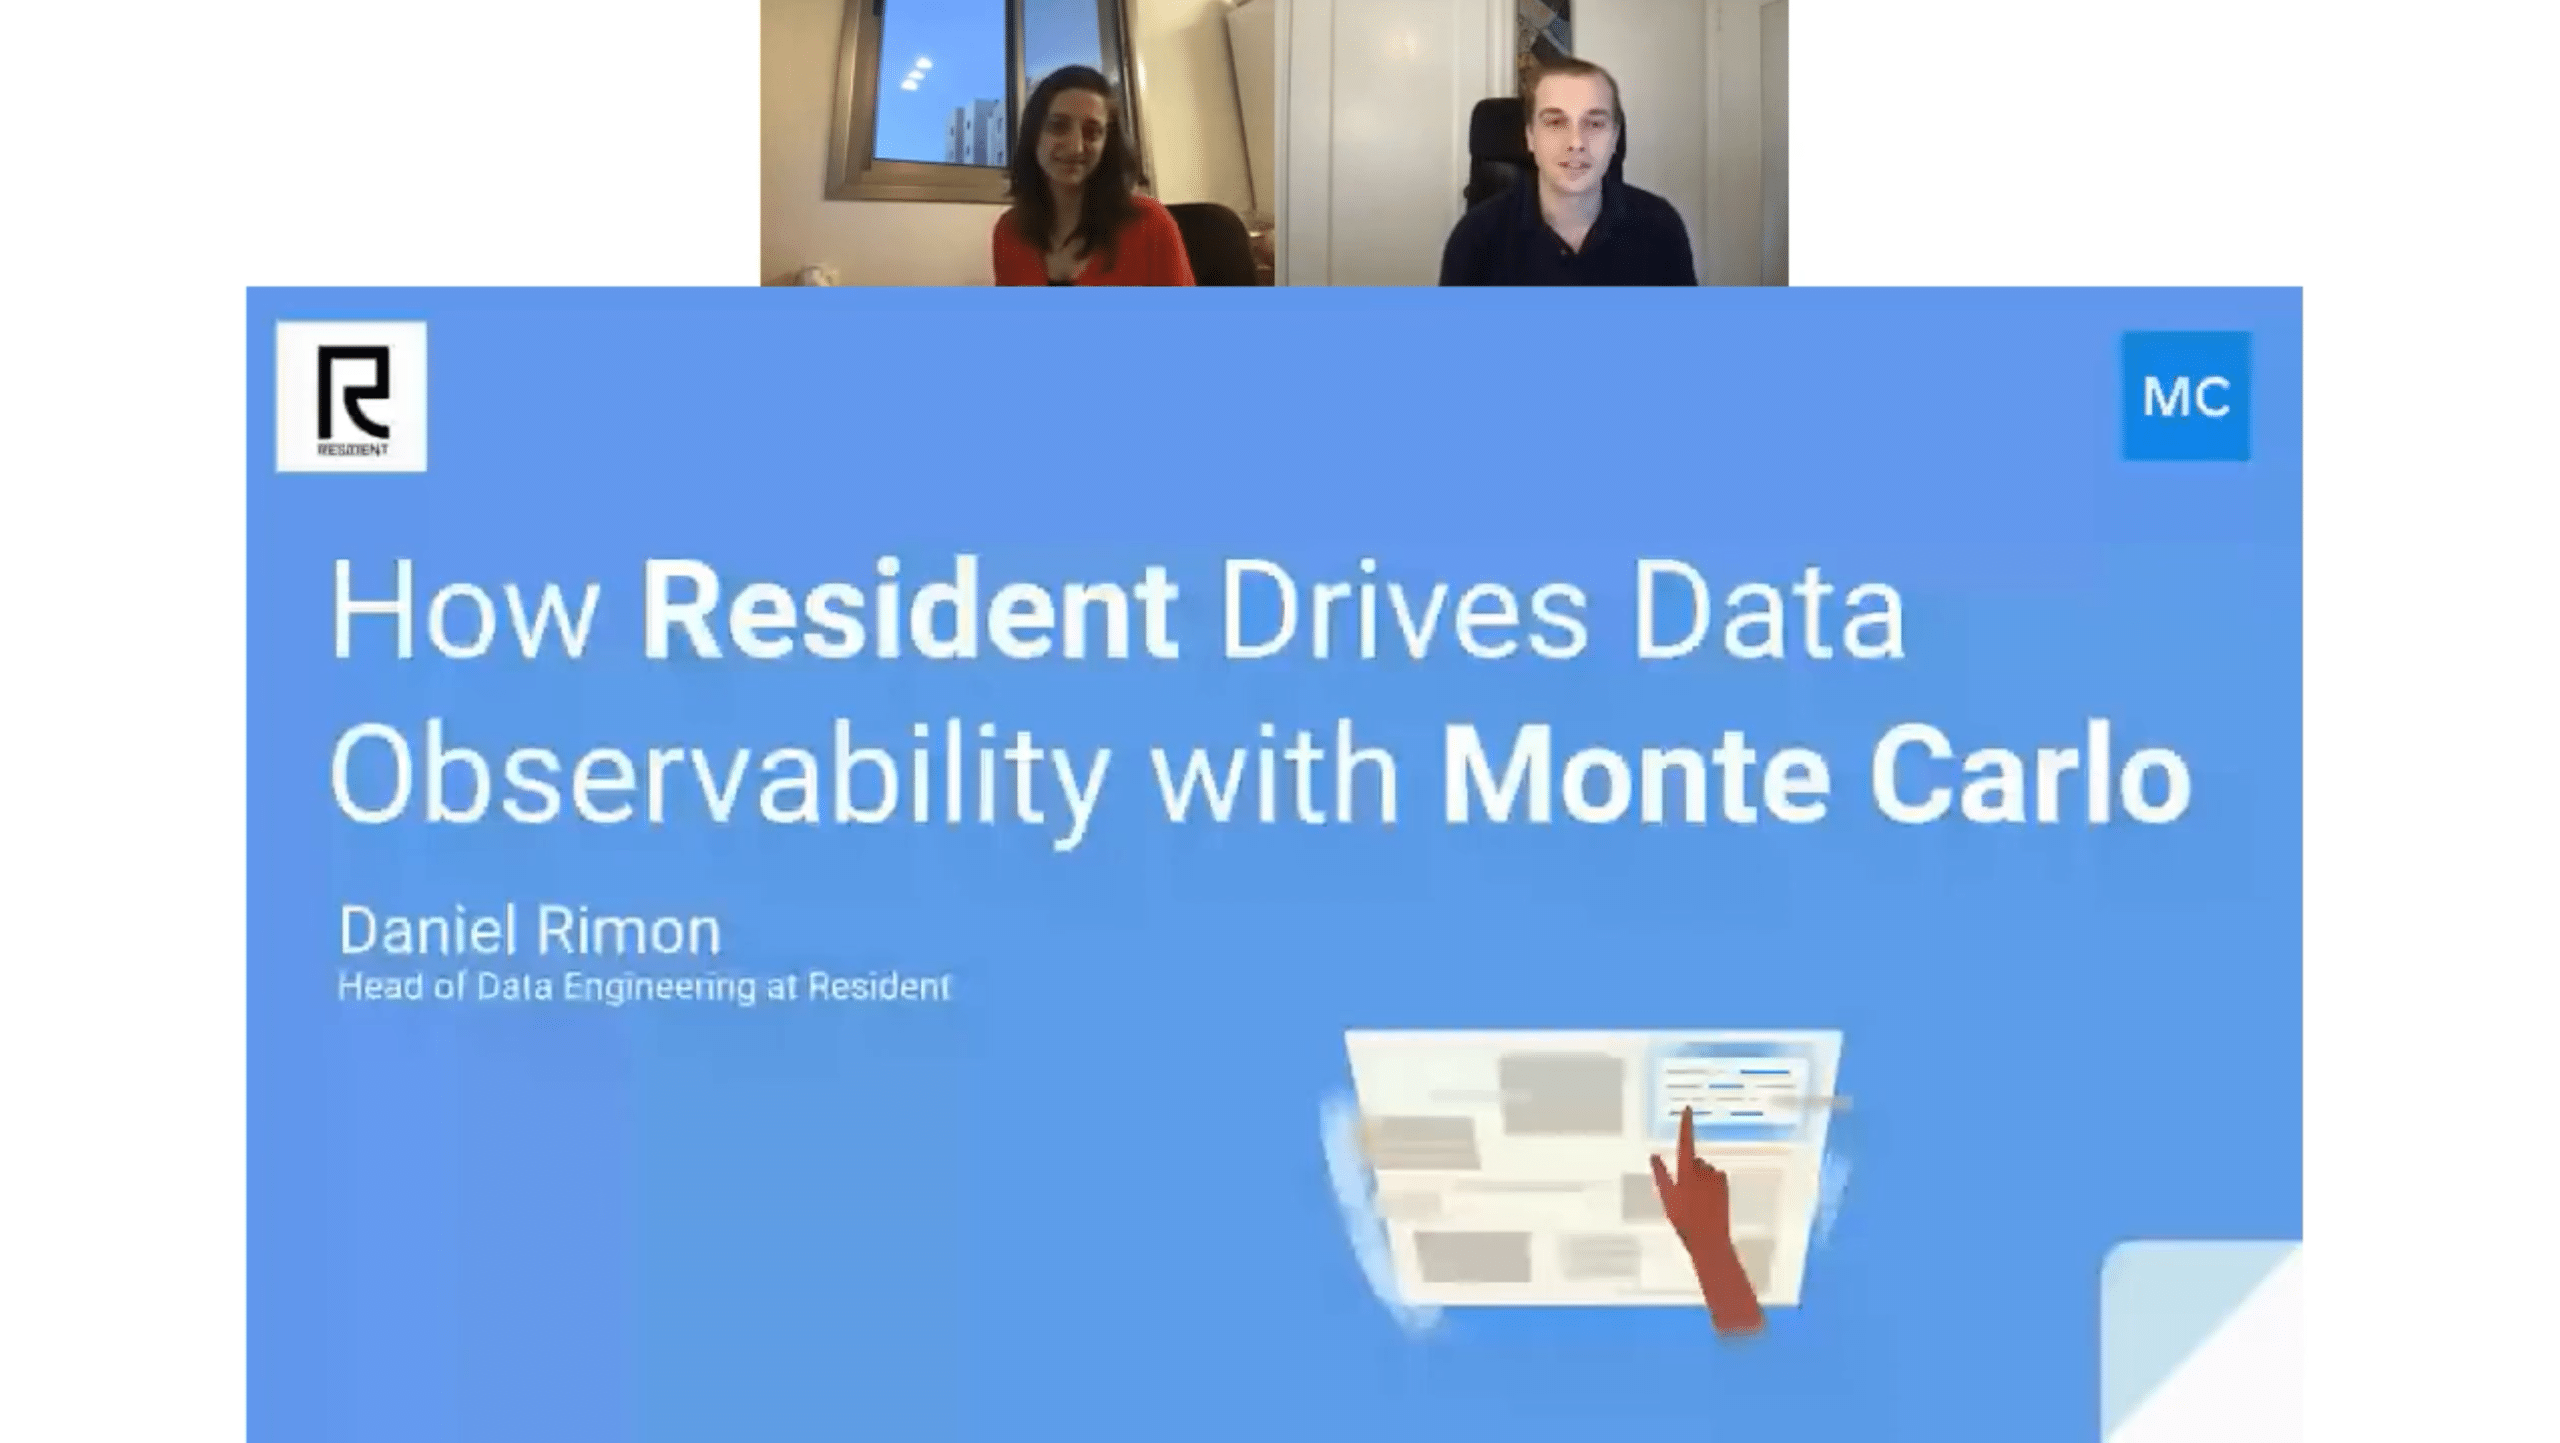 [VIDEO] How Resident Drives Data Observability with Monte Carlo